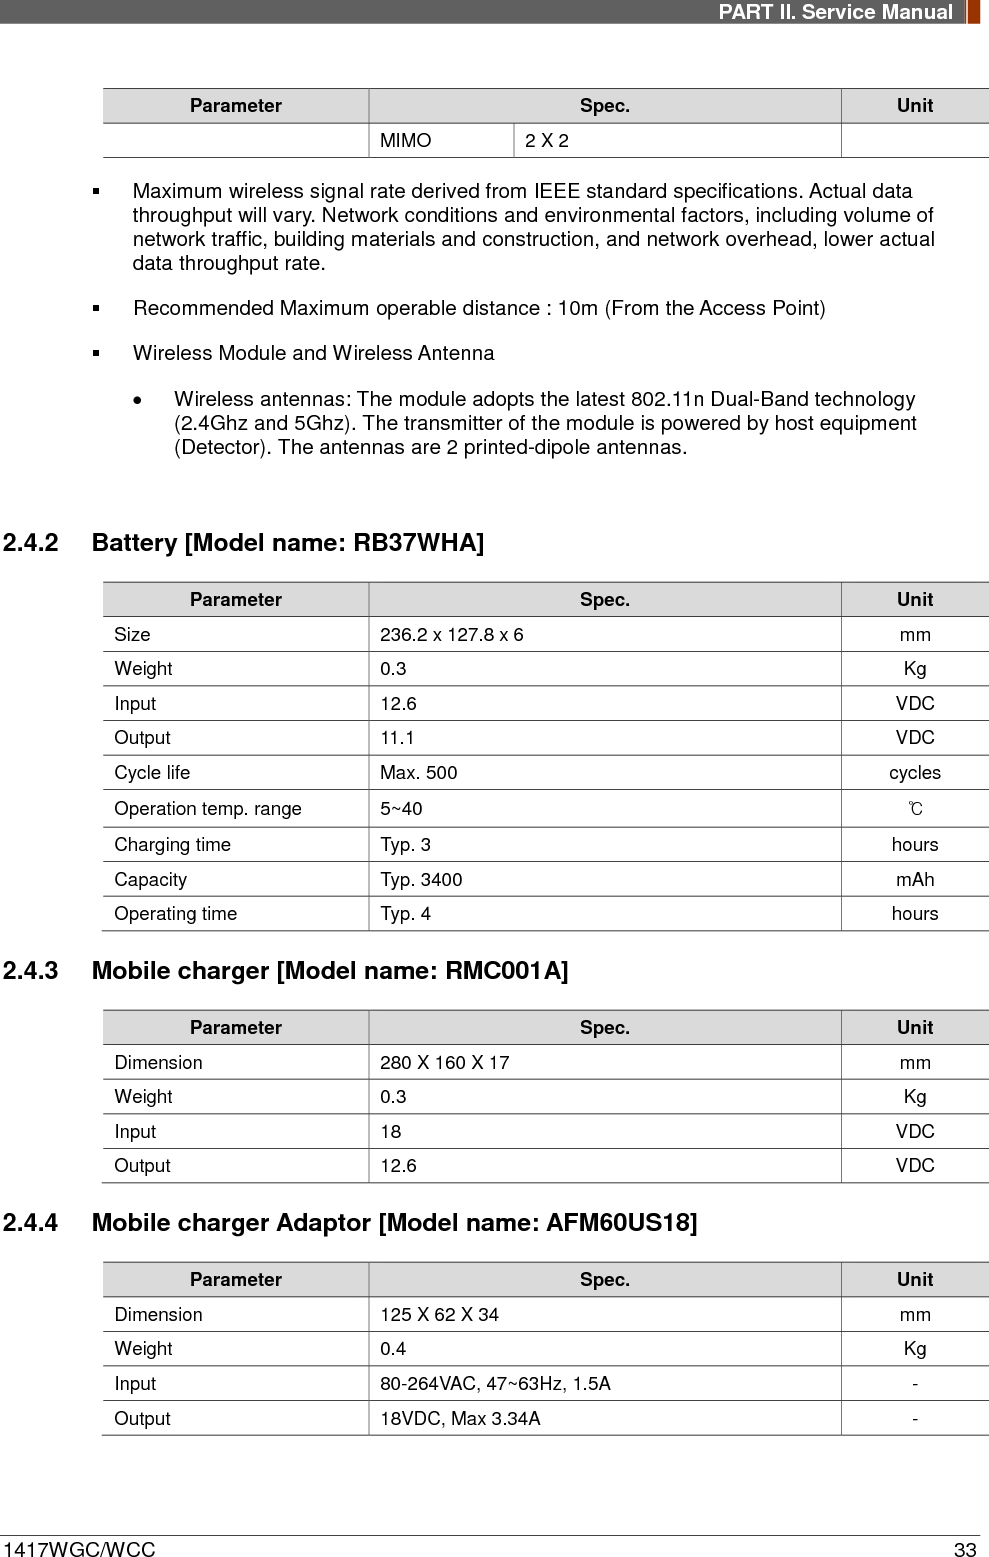 PART II. Service Manual  1417WGC/WCC 33 Parameter Spec. Unit MIMO  2 X 2    Maximum wireless signal rate derived from IEEE standard specifications. Actual data throughput will vary. Network conditions and environmental factors, including volume of network traffic, building materials and construction, and network overhead, lower actual data throughput rate.  Recommended Maximum operable distance : 10m (From the Access Point)  Wireless Module and Wireless Antenna • Wireless antennas: The module adopts the latest 802.11n Dual-Band technology (2.4Ghz and 5Ghz). The transmitter of the module is powered by host equipment (Detector). The antennas are 2 printed-dipole antennas.  2.4.2 Battery [Model name: RB37WHA] Parameter Spec. Unit Size 236.2 x 127.8 x 6  mm Weight 0.3  Kg Input 12.6 VDC Output 11.1 VDC Cycle life Max. 500 cycles Operation temp. range 5~40 ℃ Charging time Typ. 3 hours Capacity Typ. 3400  mAh Operating time Typ. 4    hours 2.4.3 Mobile charger [Model name: RMC001A] Parameter Spec. Unit Dimension 280 X 160 X 17 mm Weight 0.3  Kg Input 18 VDC Output 12.6 VDC 2.4.4 Mobile charger Adaptor [Model name: AFM60US18] Parameter Spec. Unit Dimension 125 X 62 X 34 mm Weight 0.4  Kg Input 80-264VAC, 47~63Hz, 1.5A  - Output 18VDC, Max 3.34A  - 